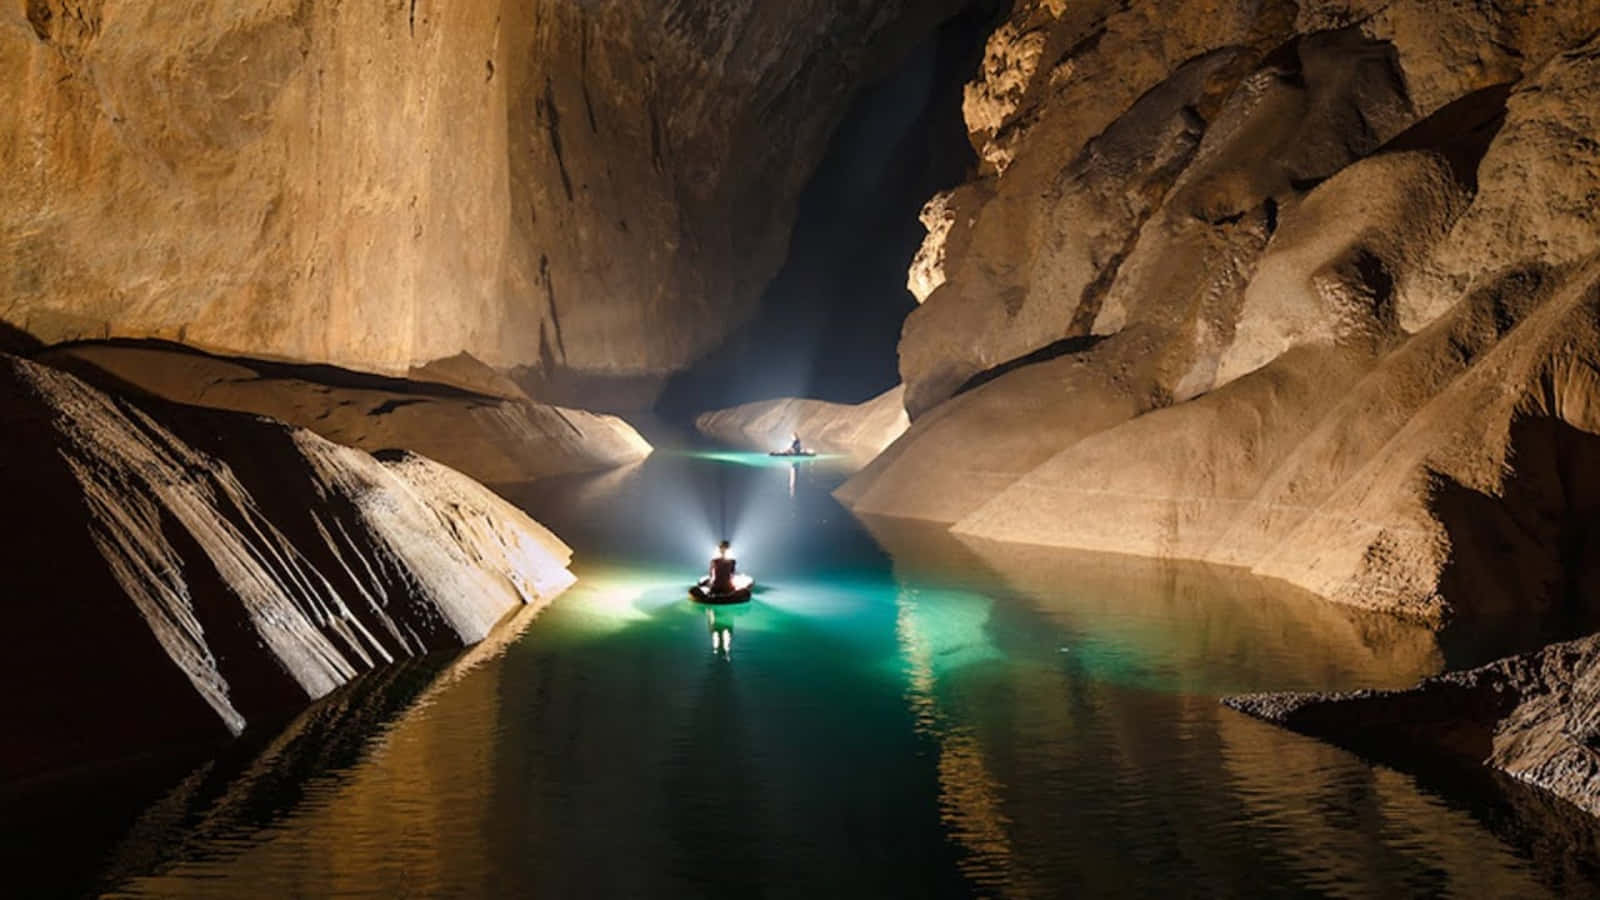 Mysterious Cave illuminated by sunlight